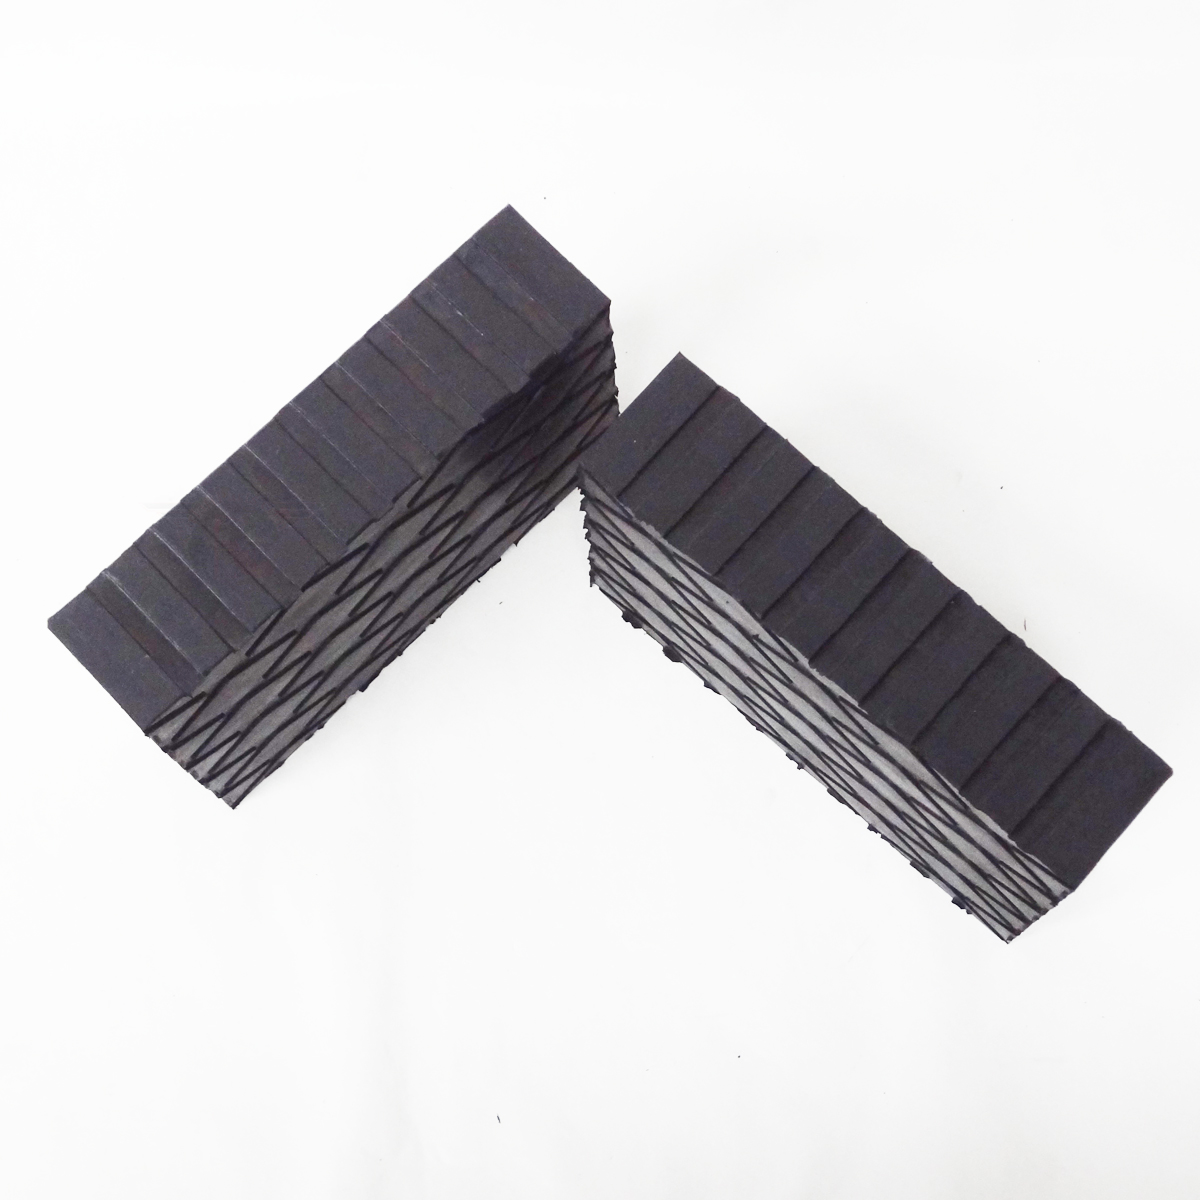 Solid Rubber Stack Blocks (6) for Any Auto Lift or Rolling Jack